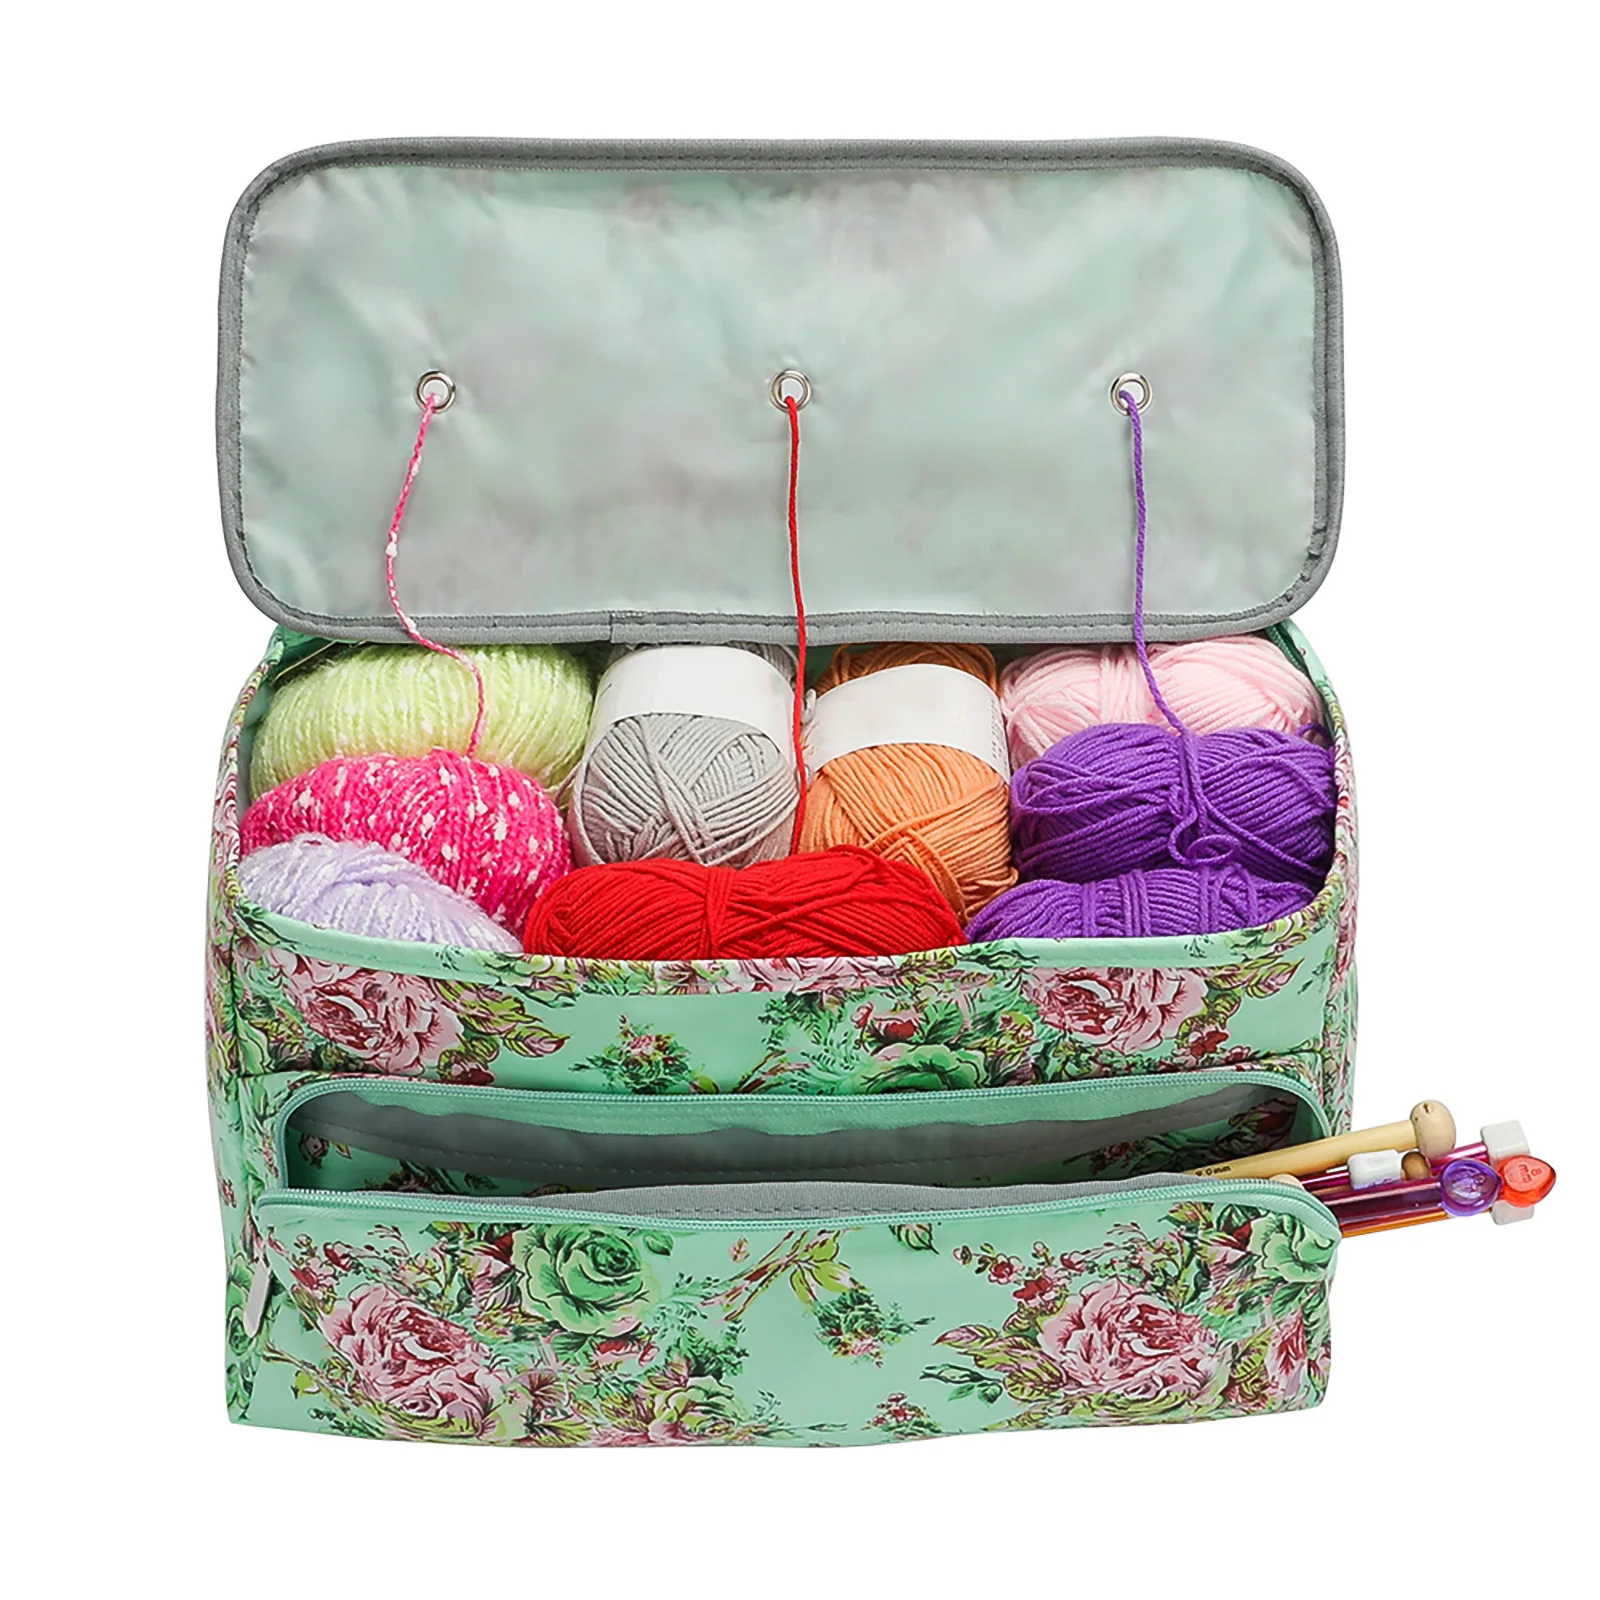 

Yarn Bags Crochet Totes Portable Crochet Yarn Storage Bag Organizer with Holes Knitting Bag Prevent Tangling Totes